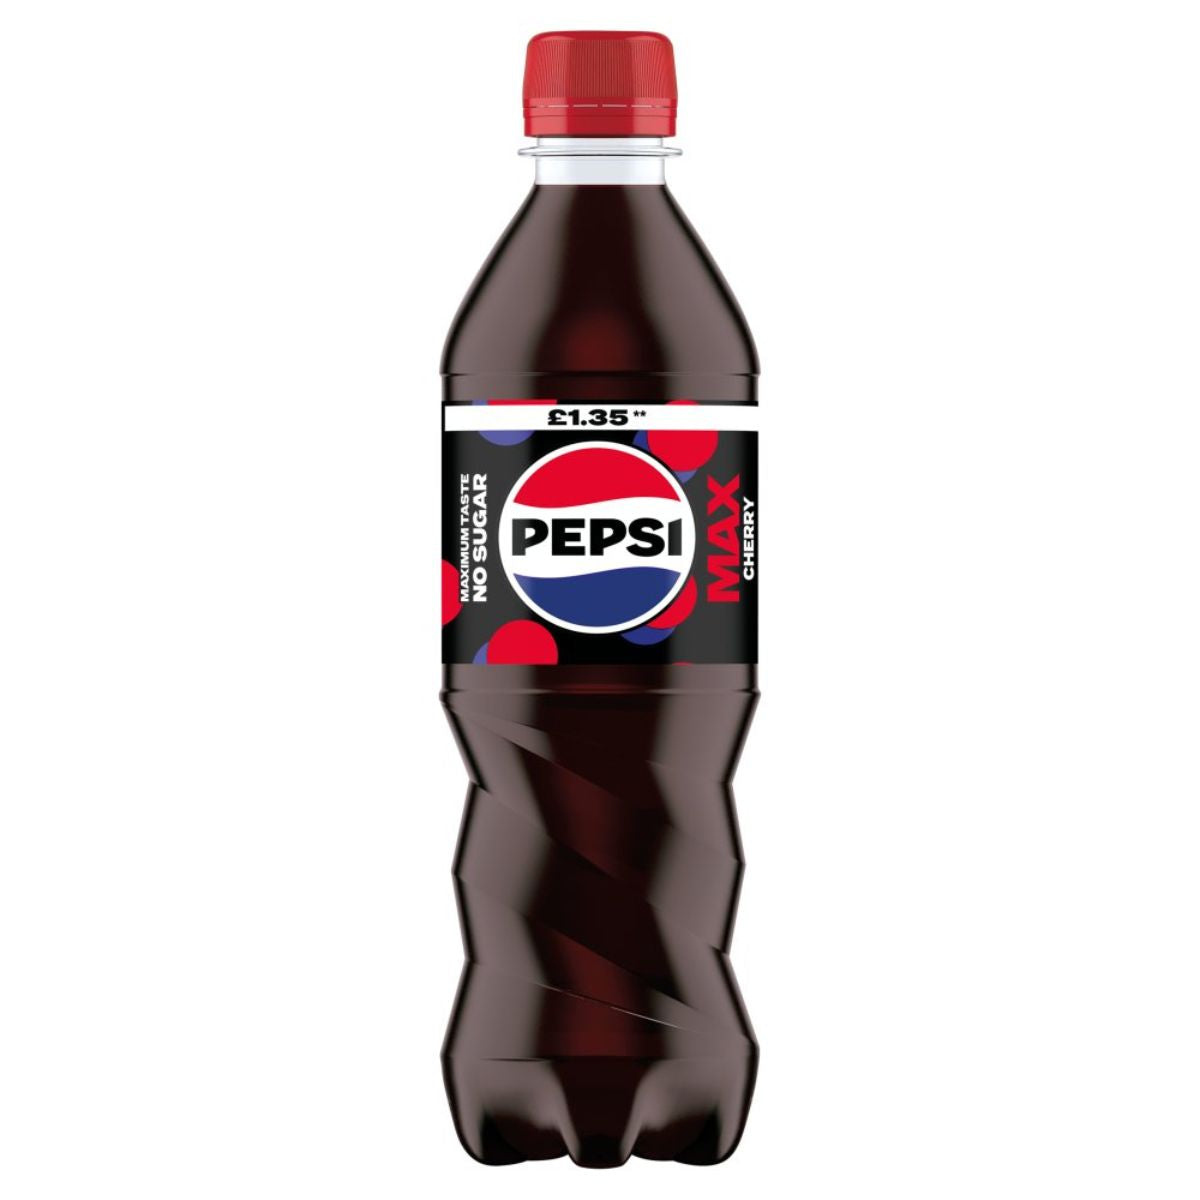 A bottle of Pepsi Max Cherry - 500ml on a white background.